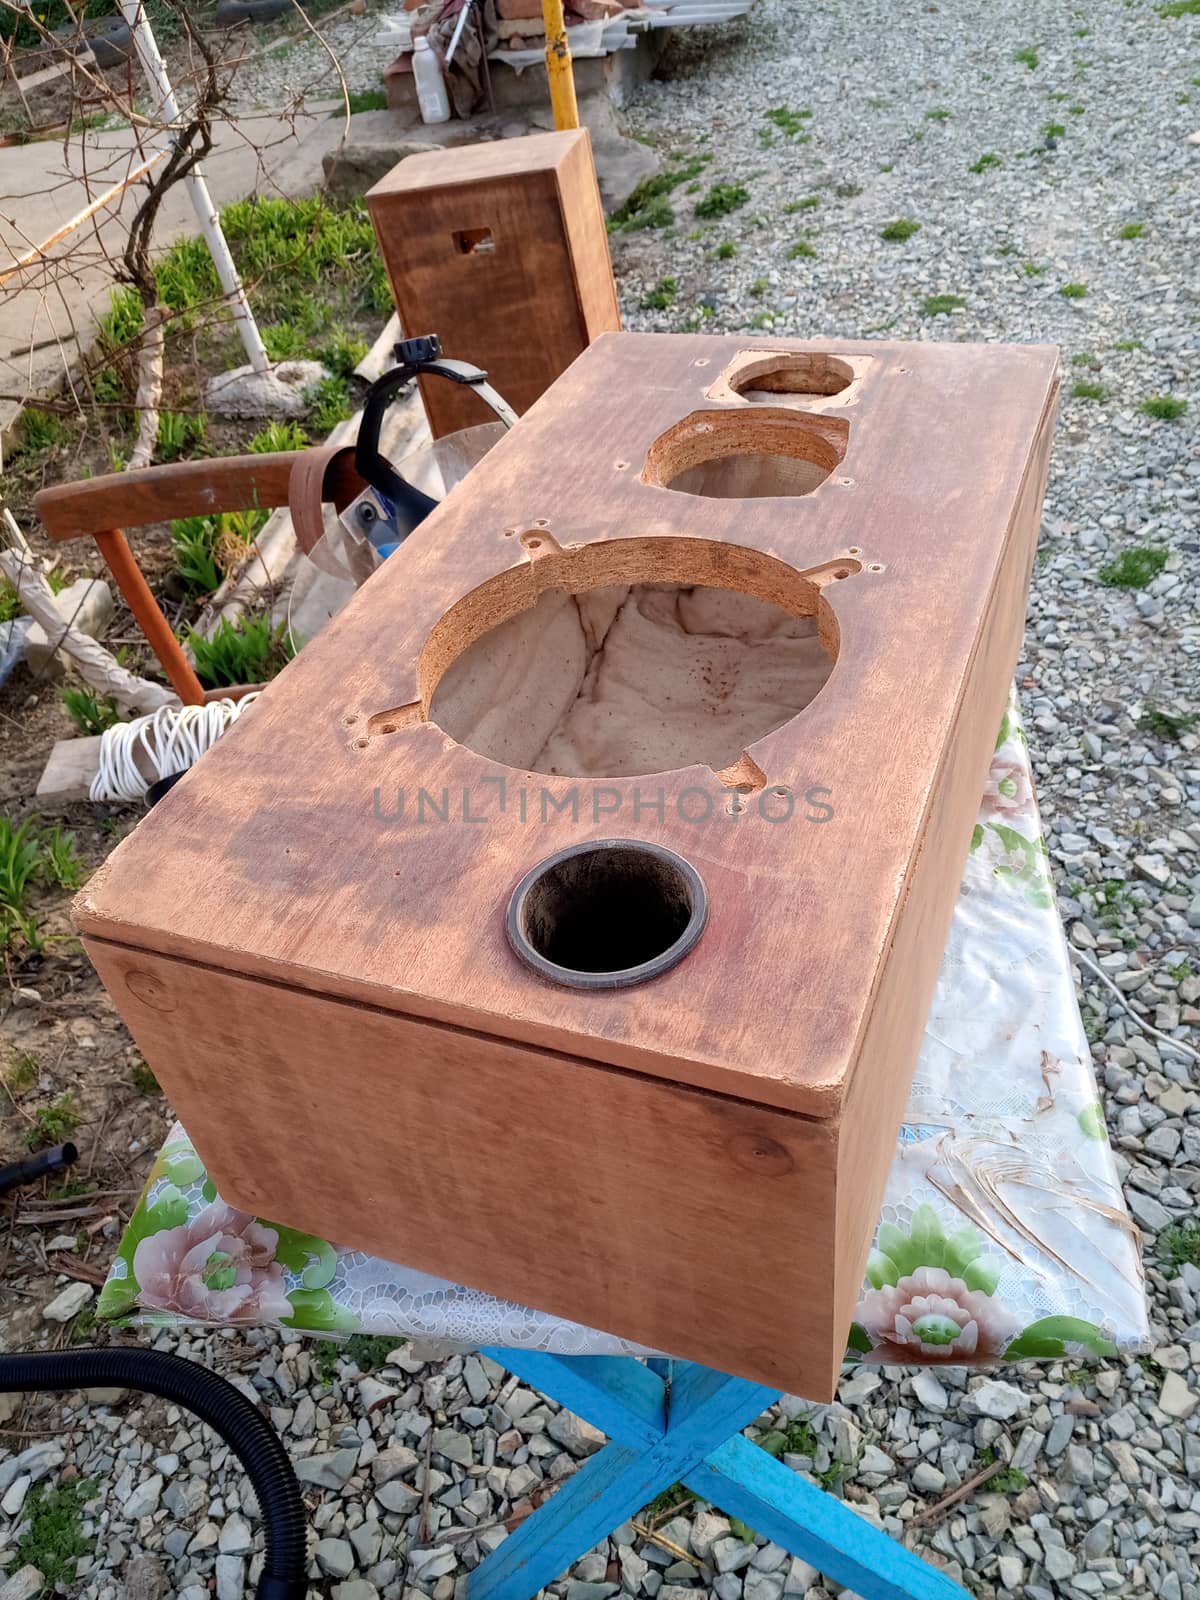 Case of the Acoustic vintage system amphiton 35ac-018 during restoration. Grinding and painting.